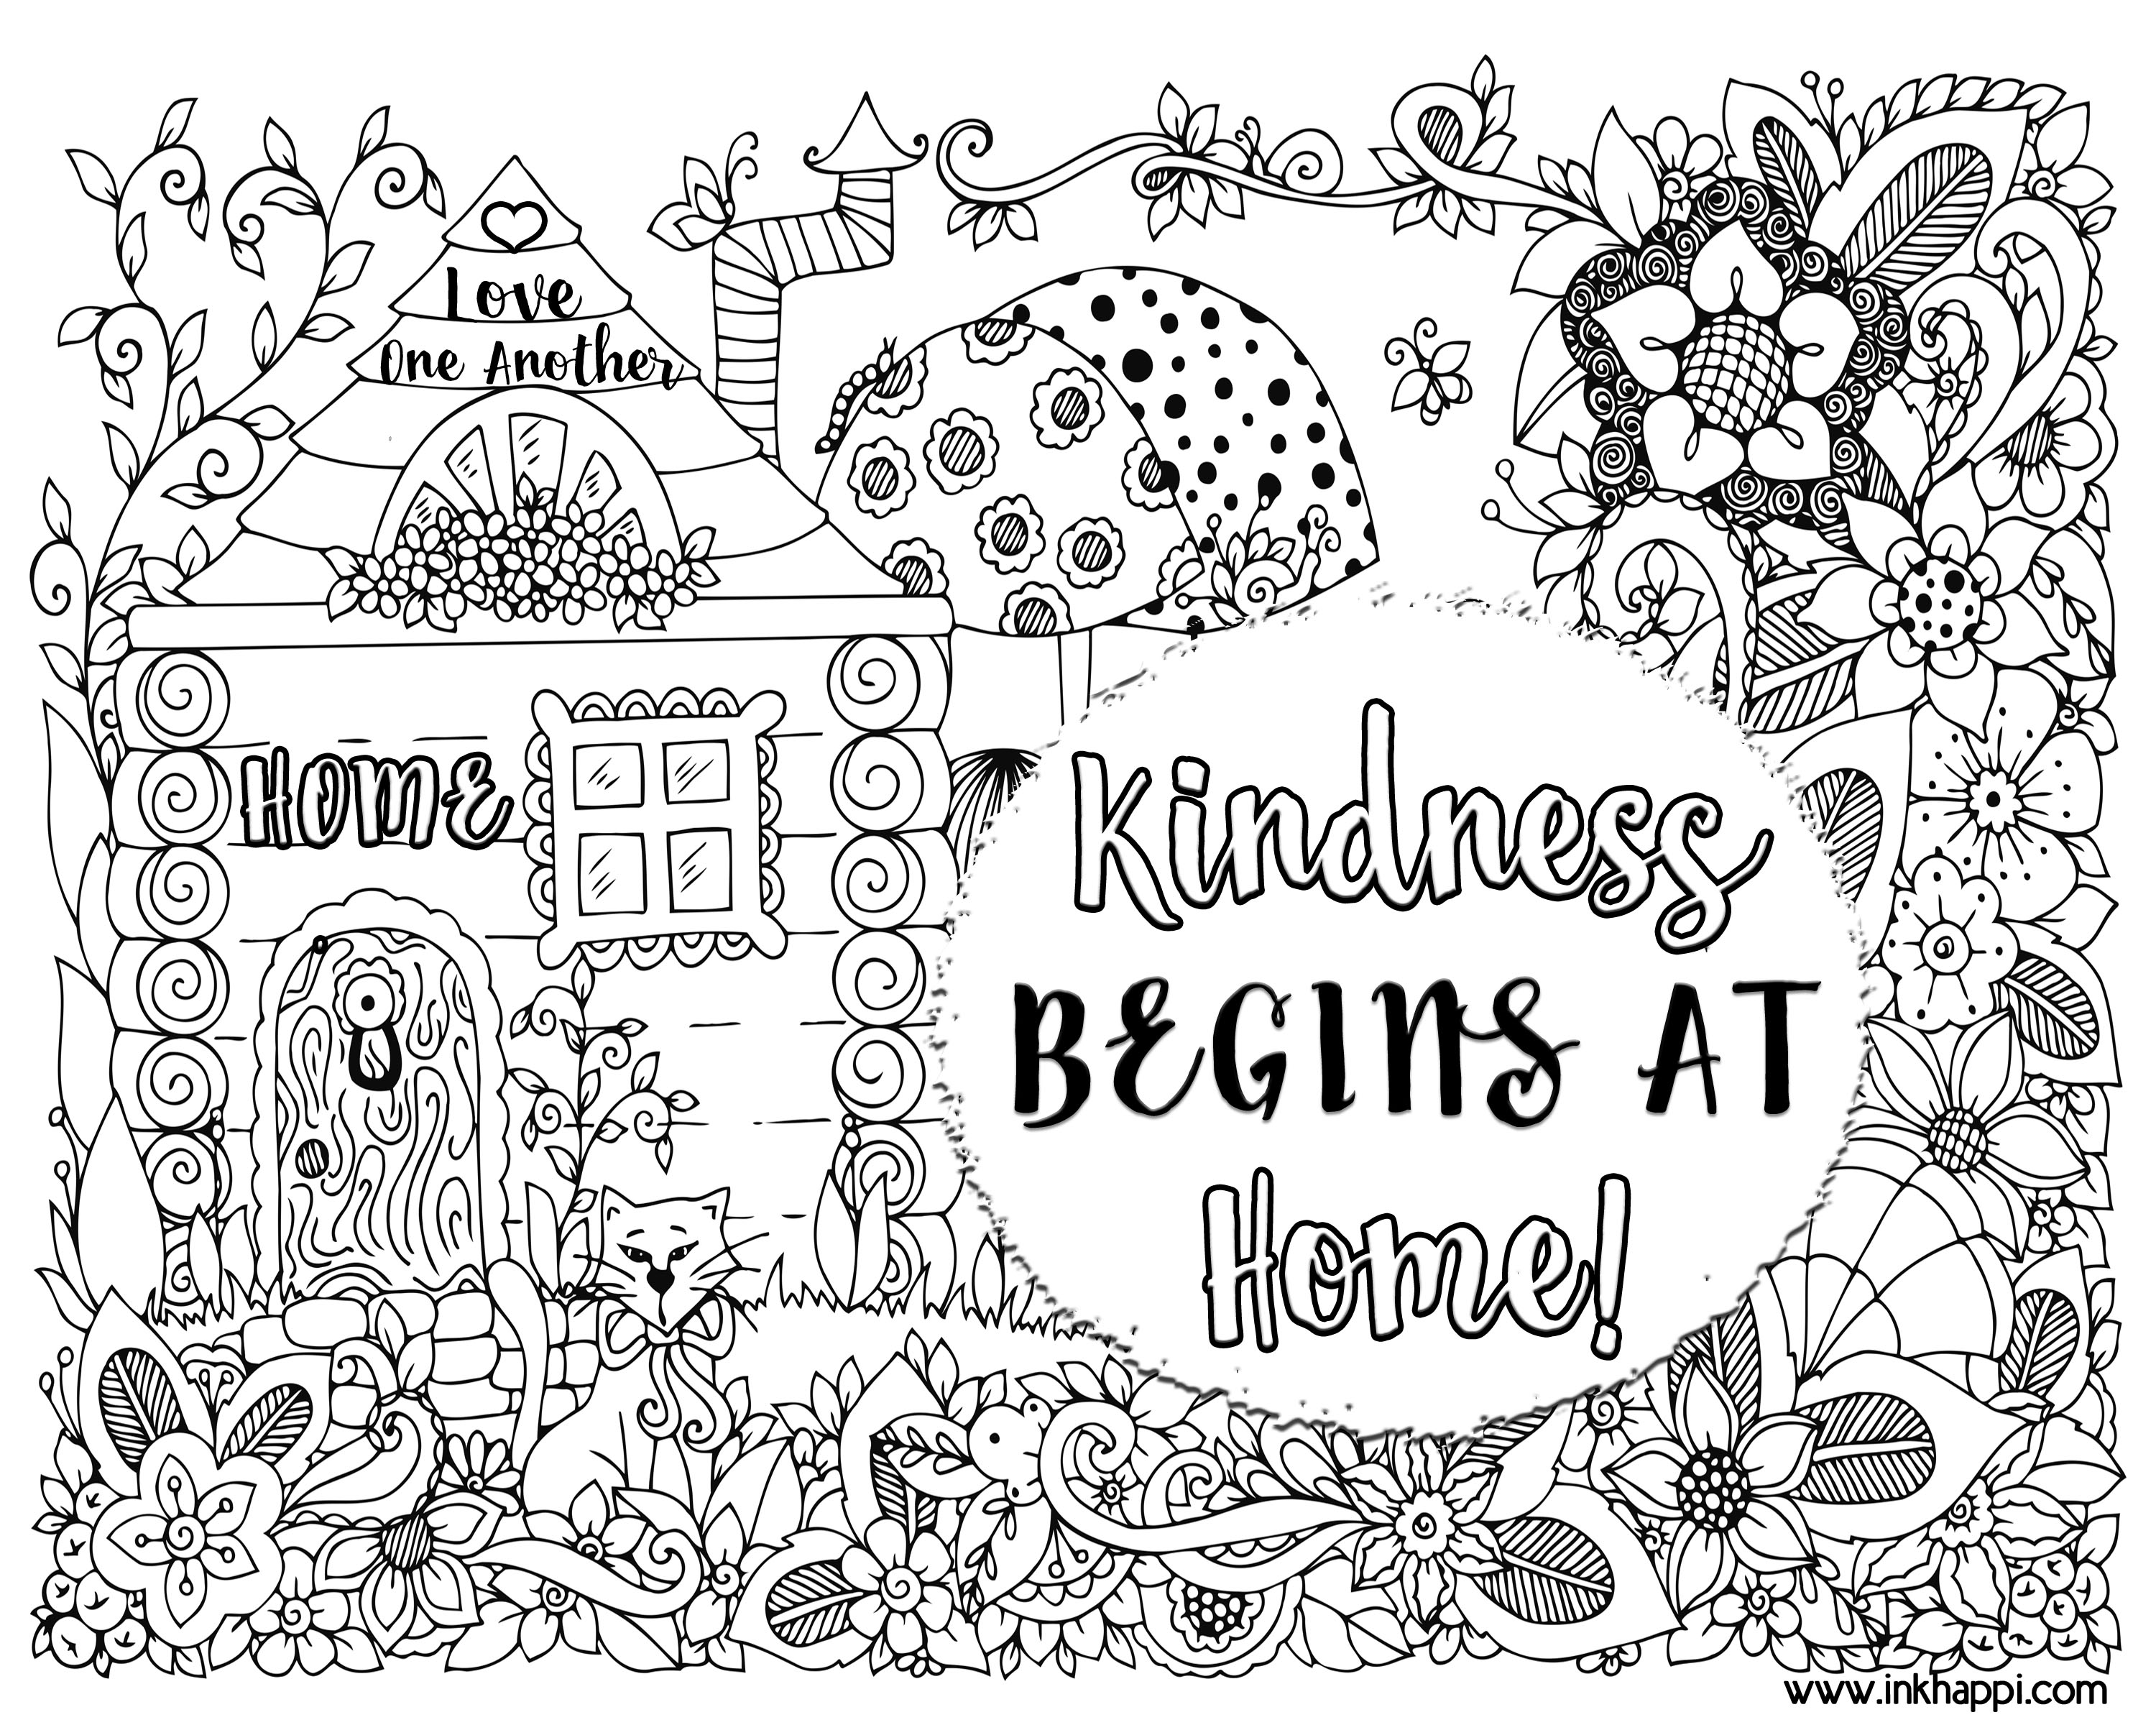 Kindness Begins at Home... A Coloring Page and a Message inkhappi